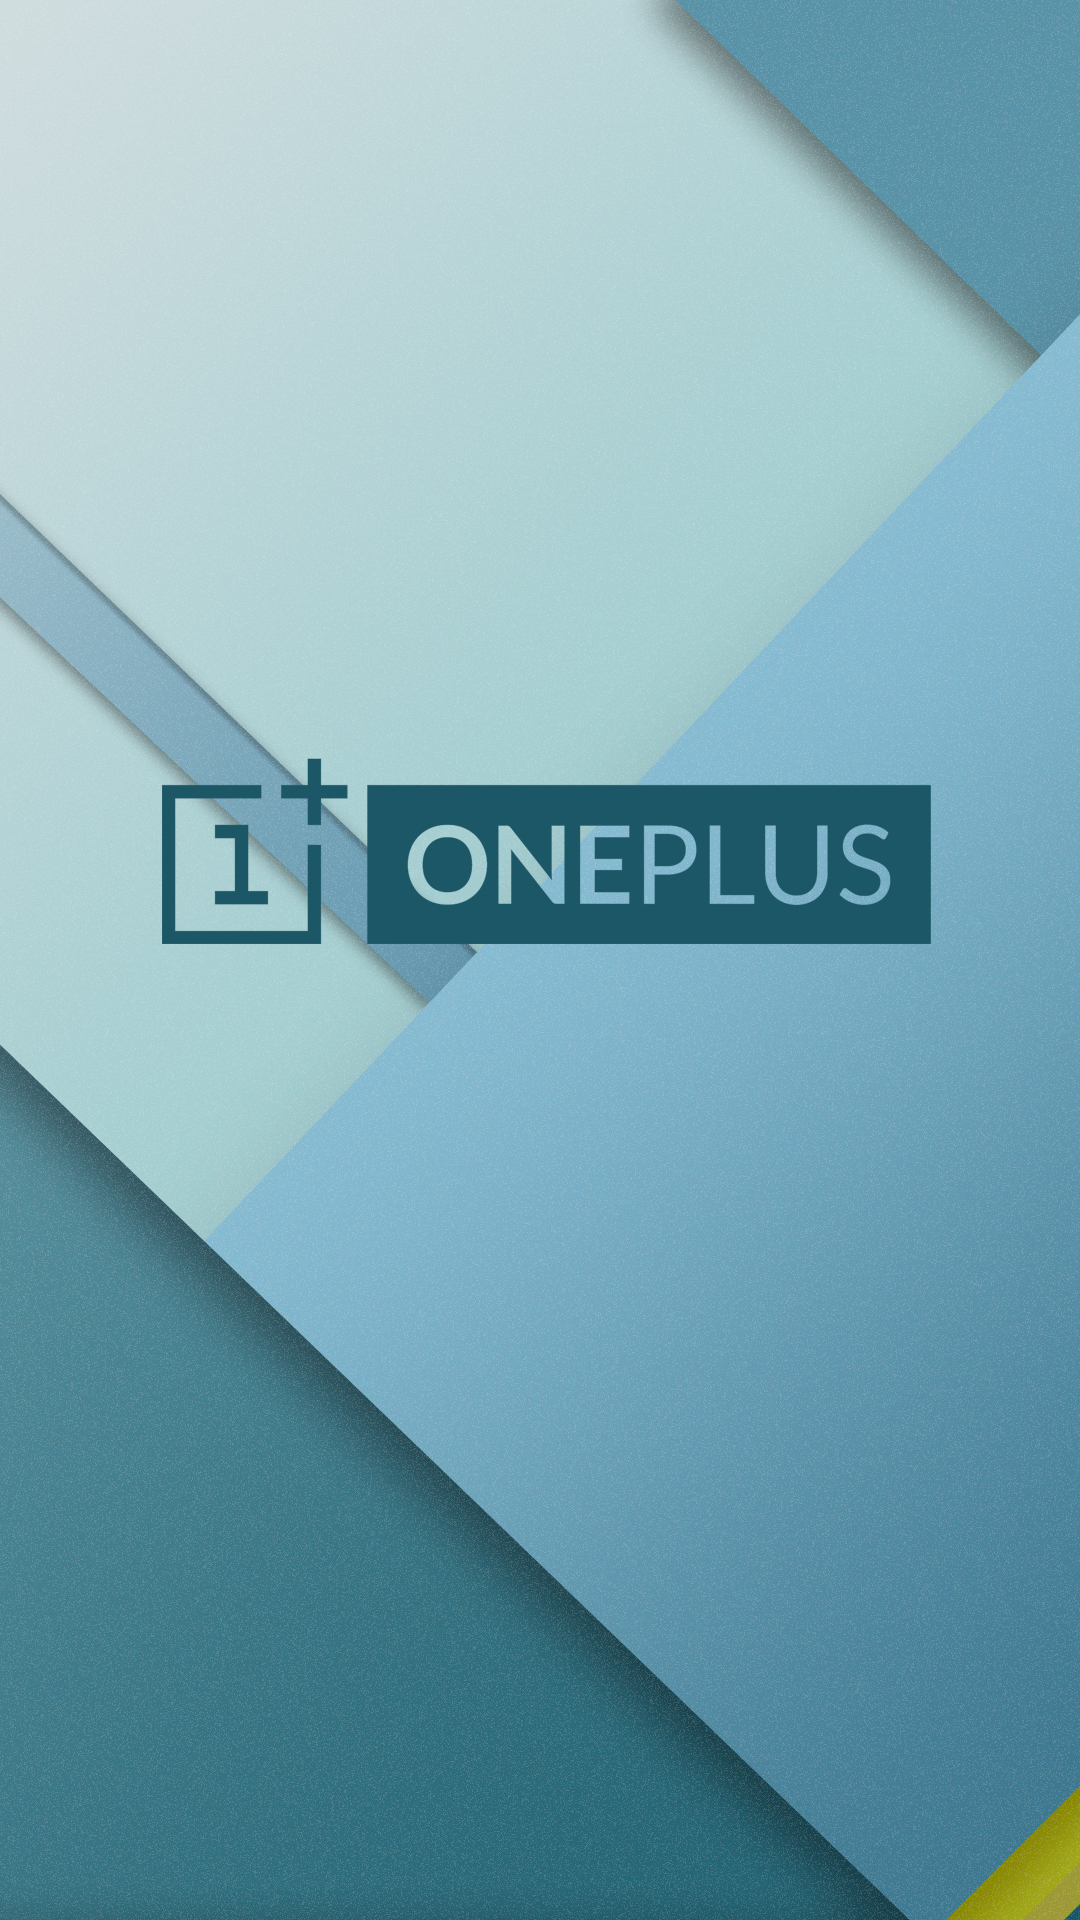 wallpaper for oneplus 3t,blue,text,product,aqua,turquoise